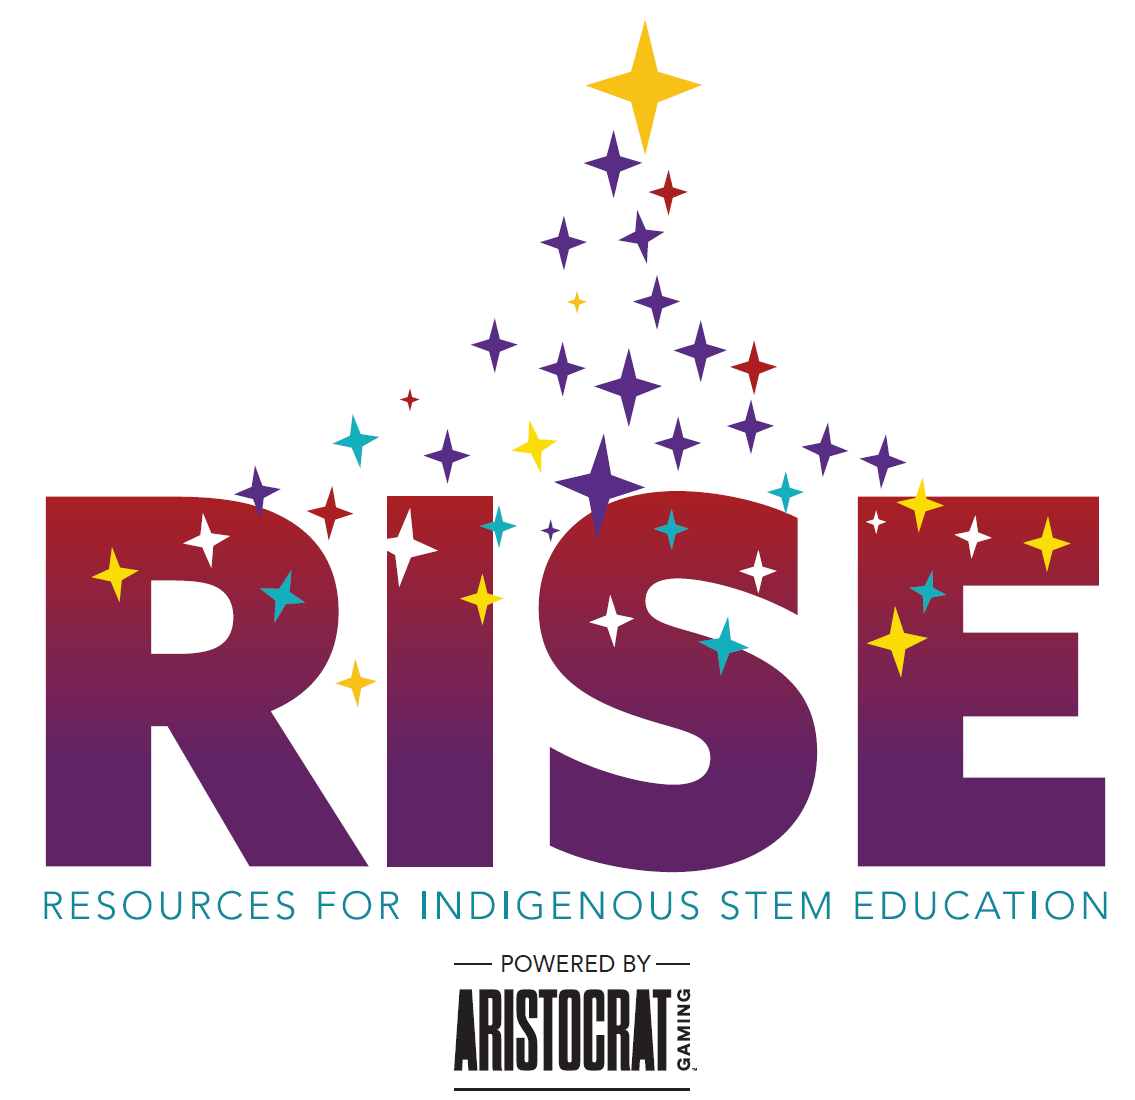 Resources for Indigenous STEM Education